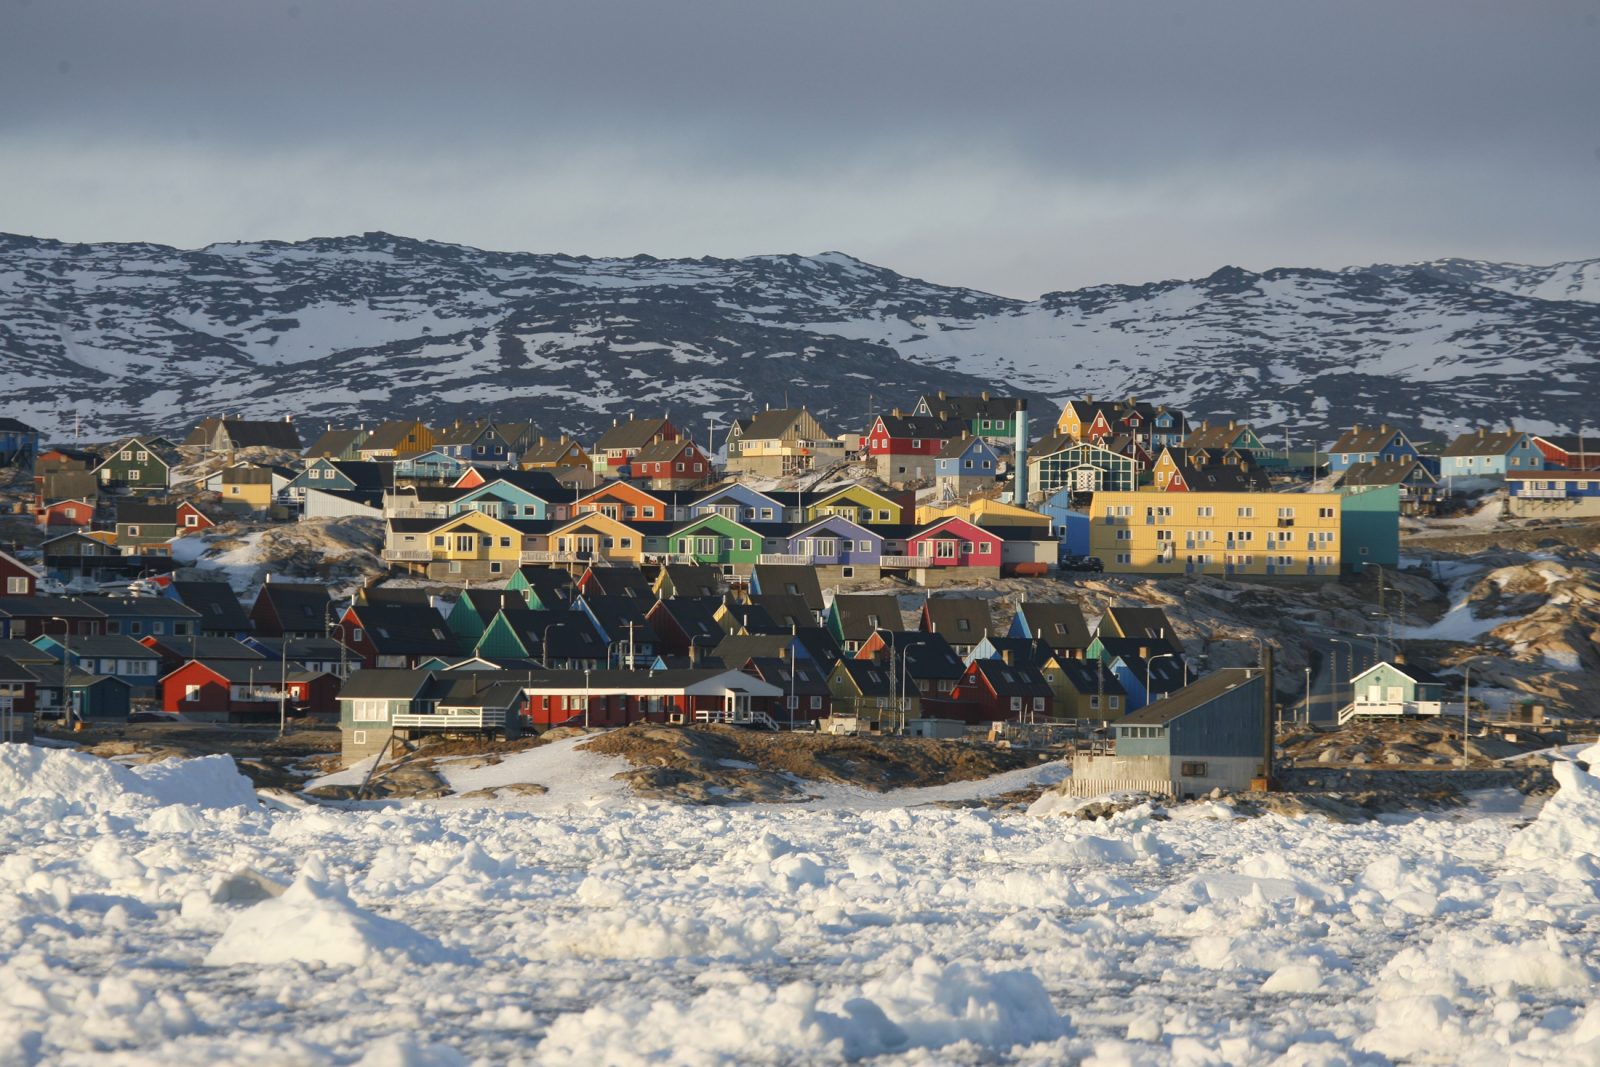 How Close to 20/20 Can You Get on This General Knowledge Test? Houses are painted in bright colors in the town of Ilulissat in western Greenland